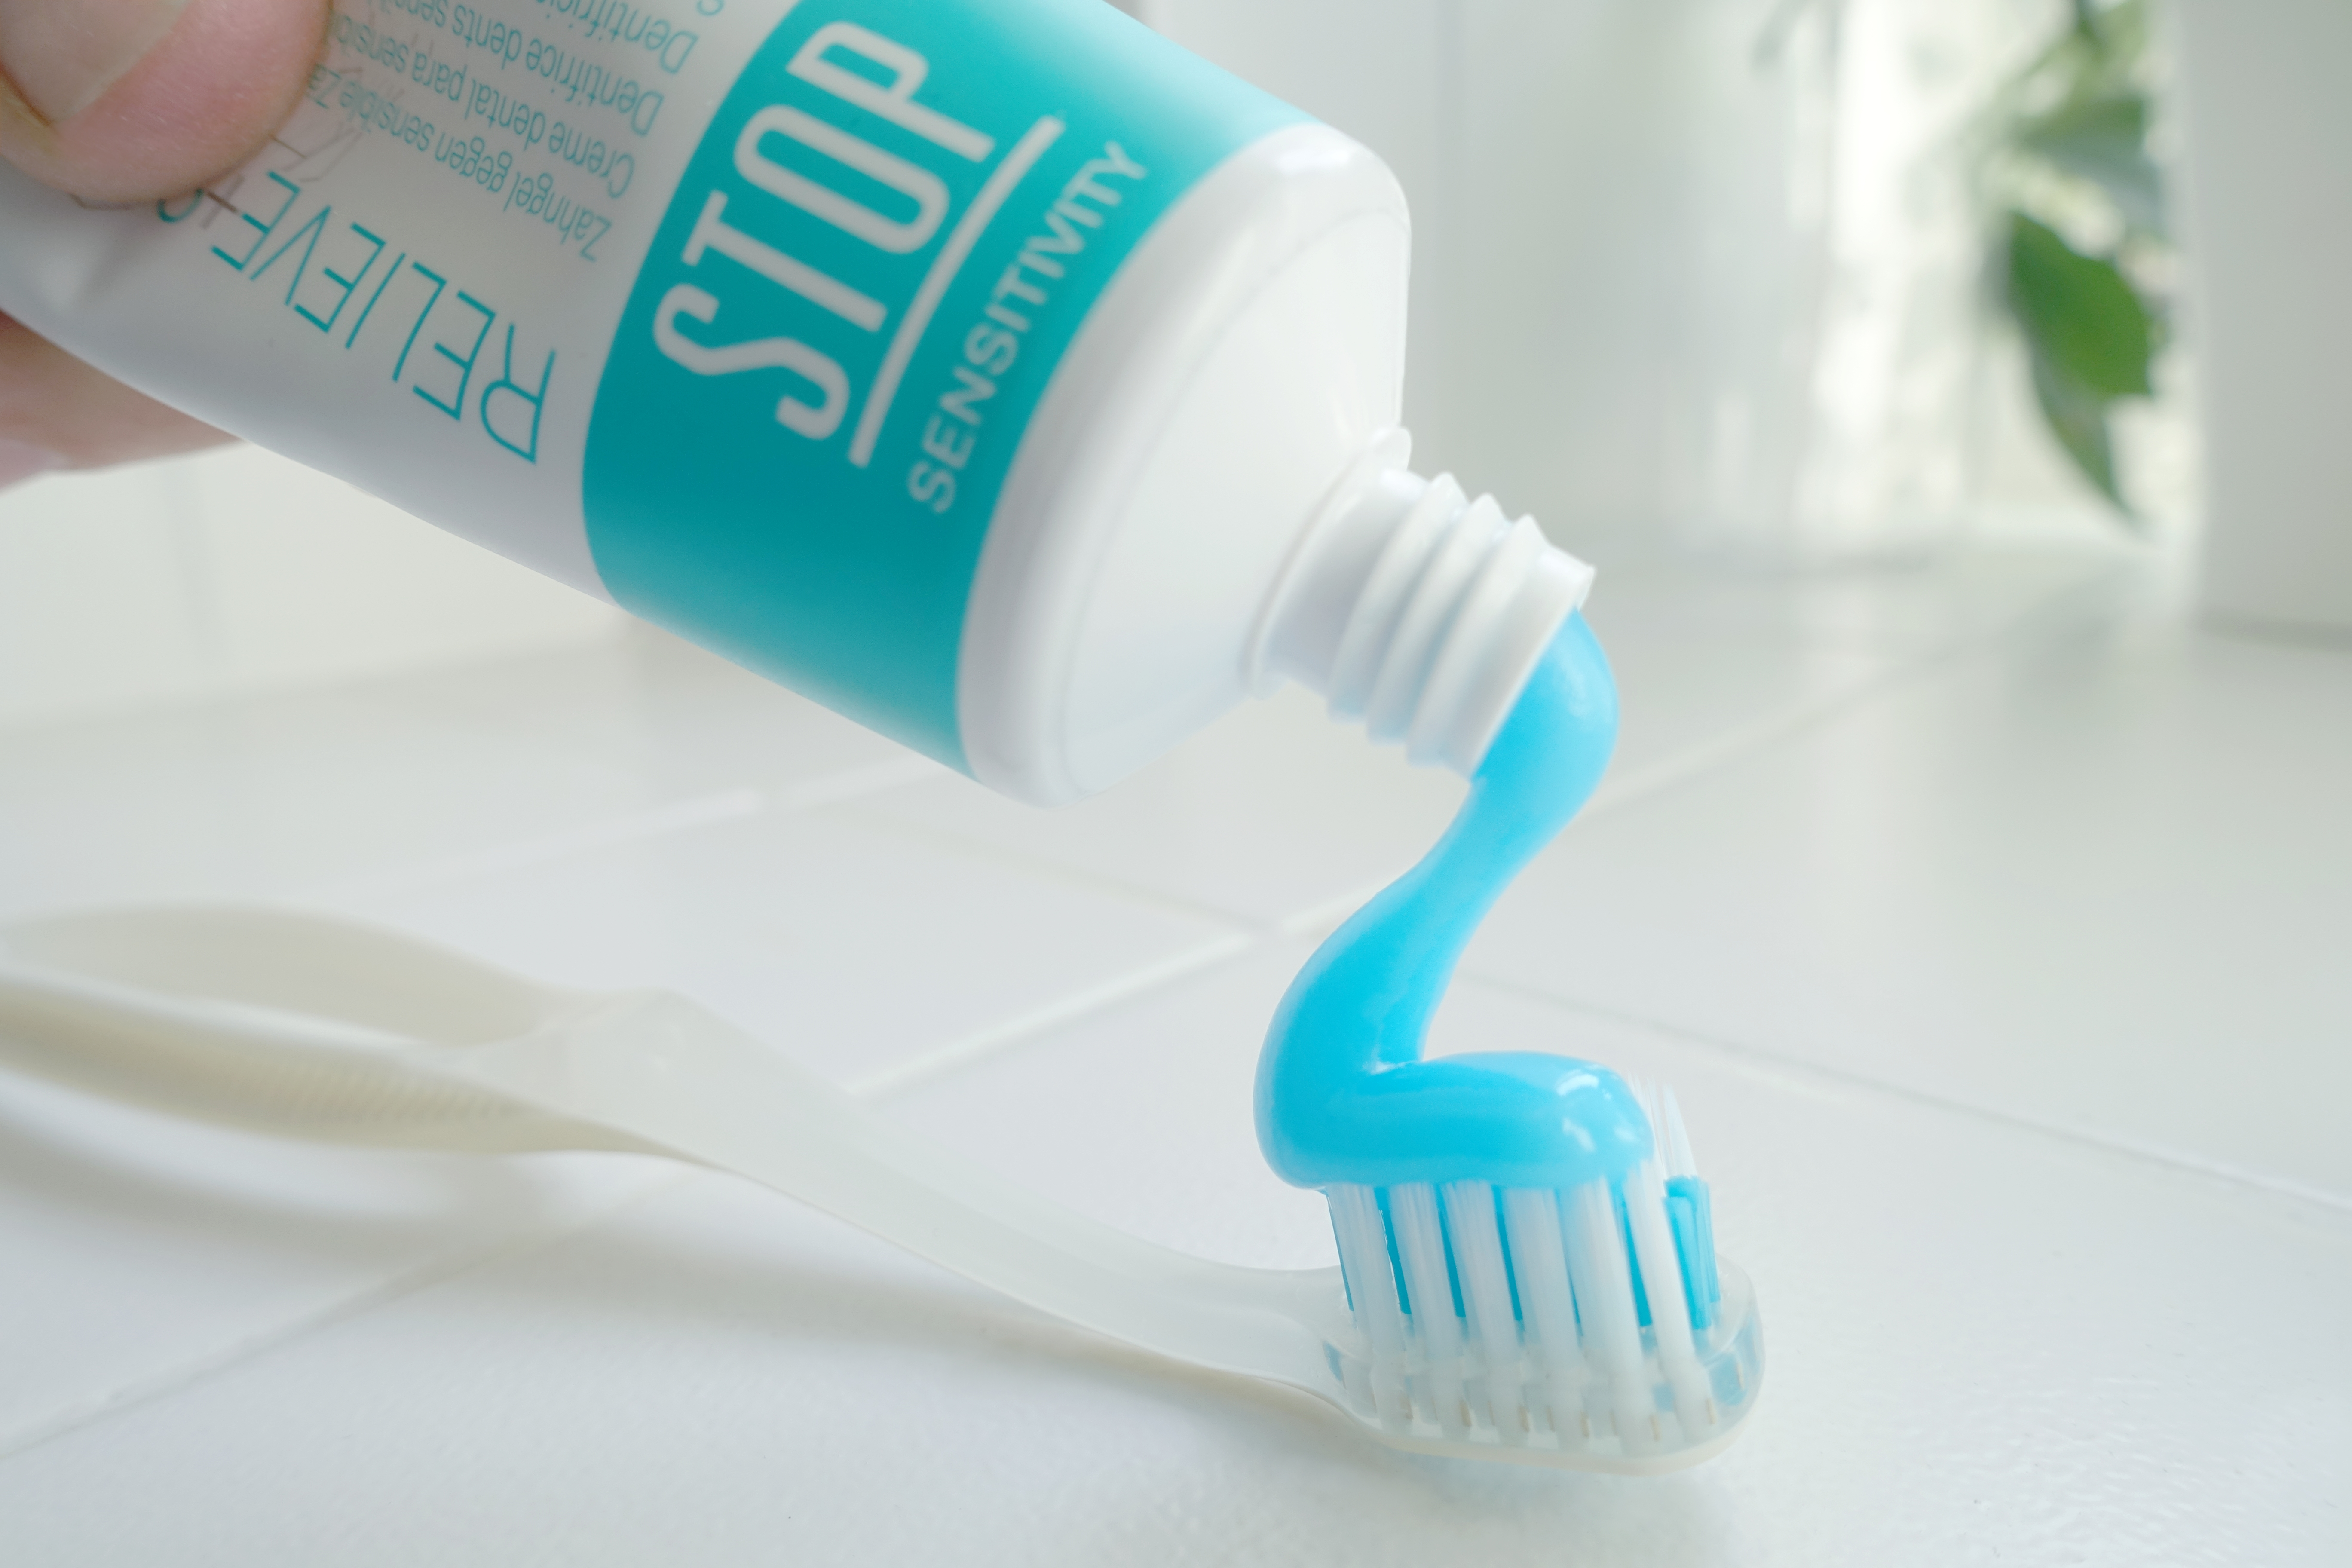 STOP sensitivity toothpaste with Pro-Ortho orthodontic toothbrush